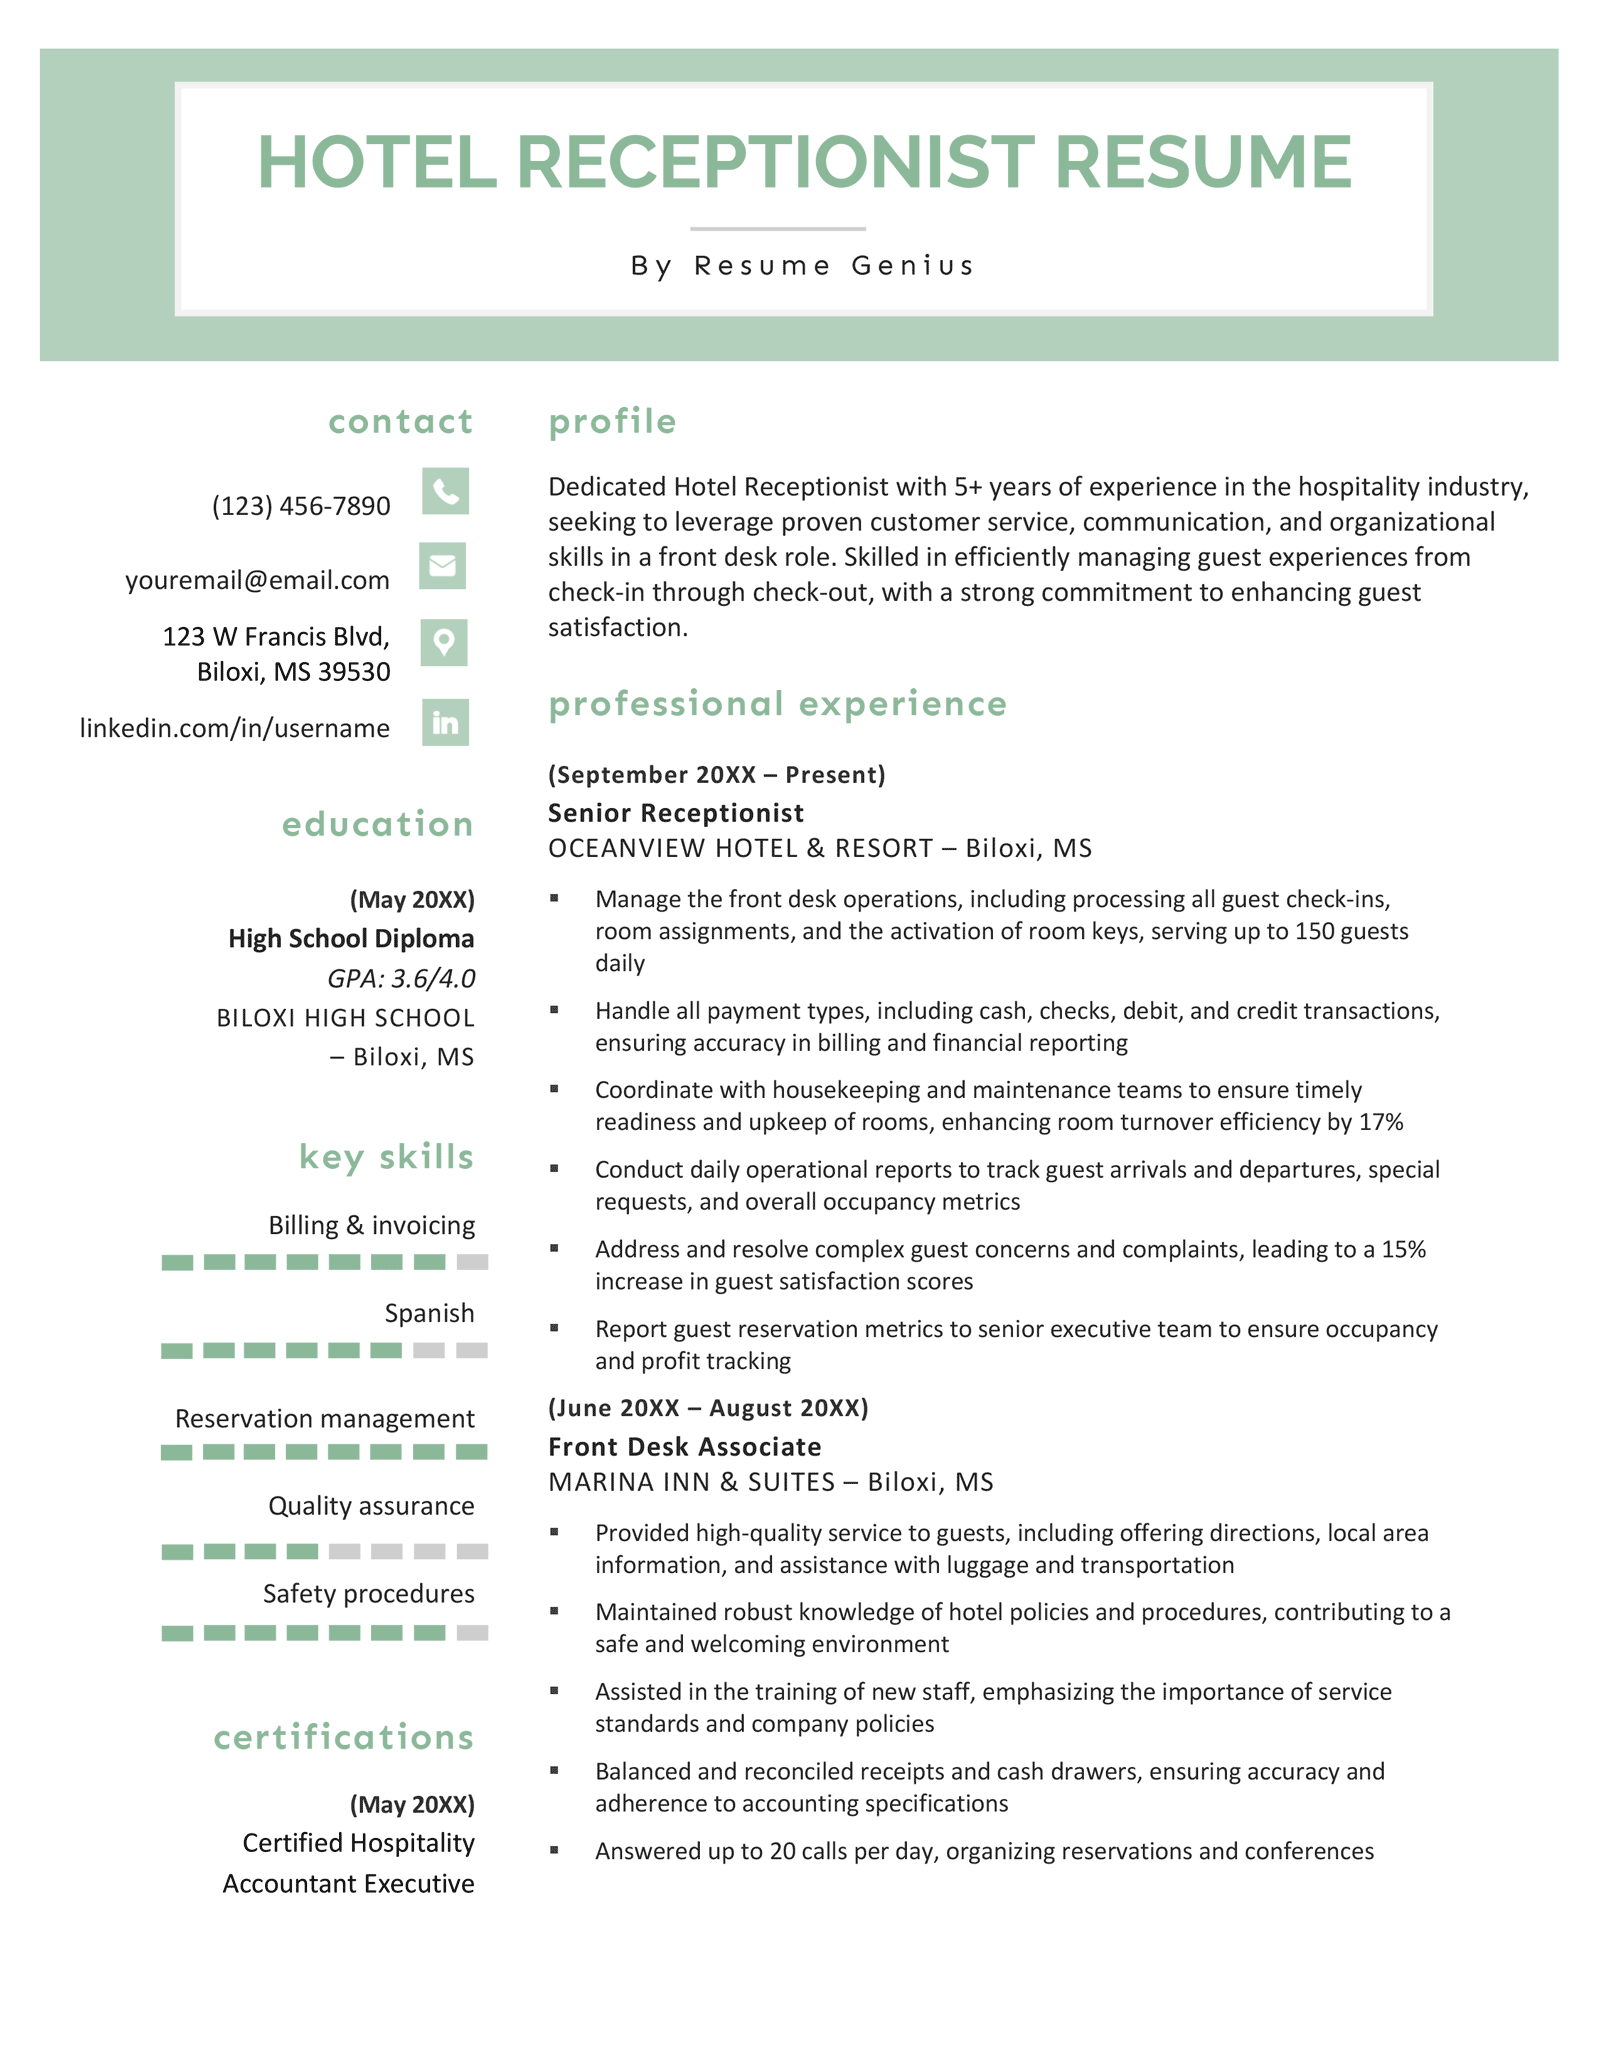 A hotel receptionist resume example that uses a green color scheme and skills bars to describe the applicant's skill levels.